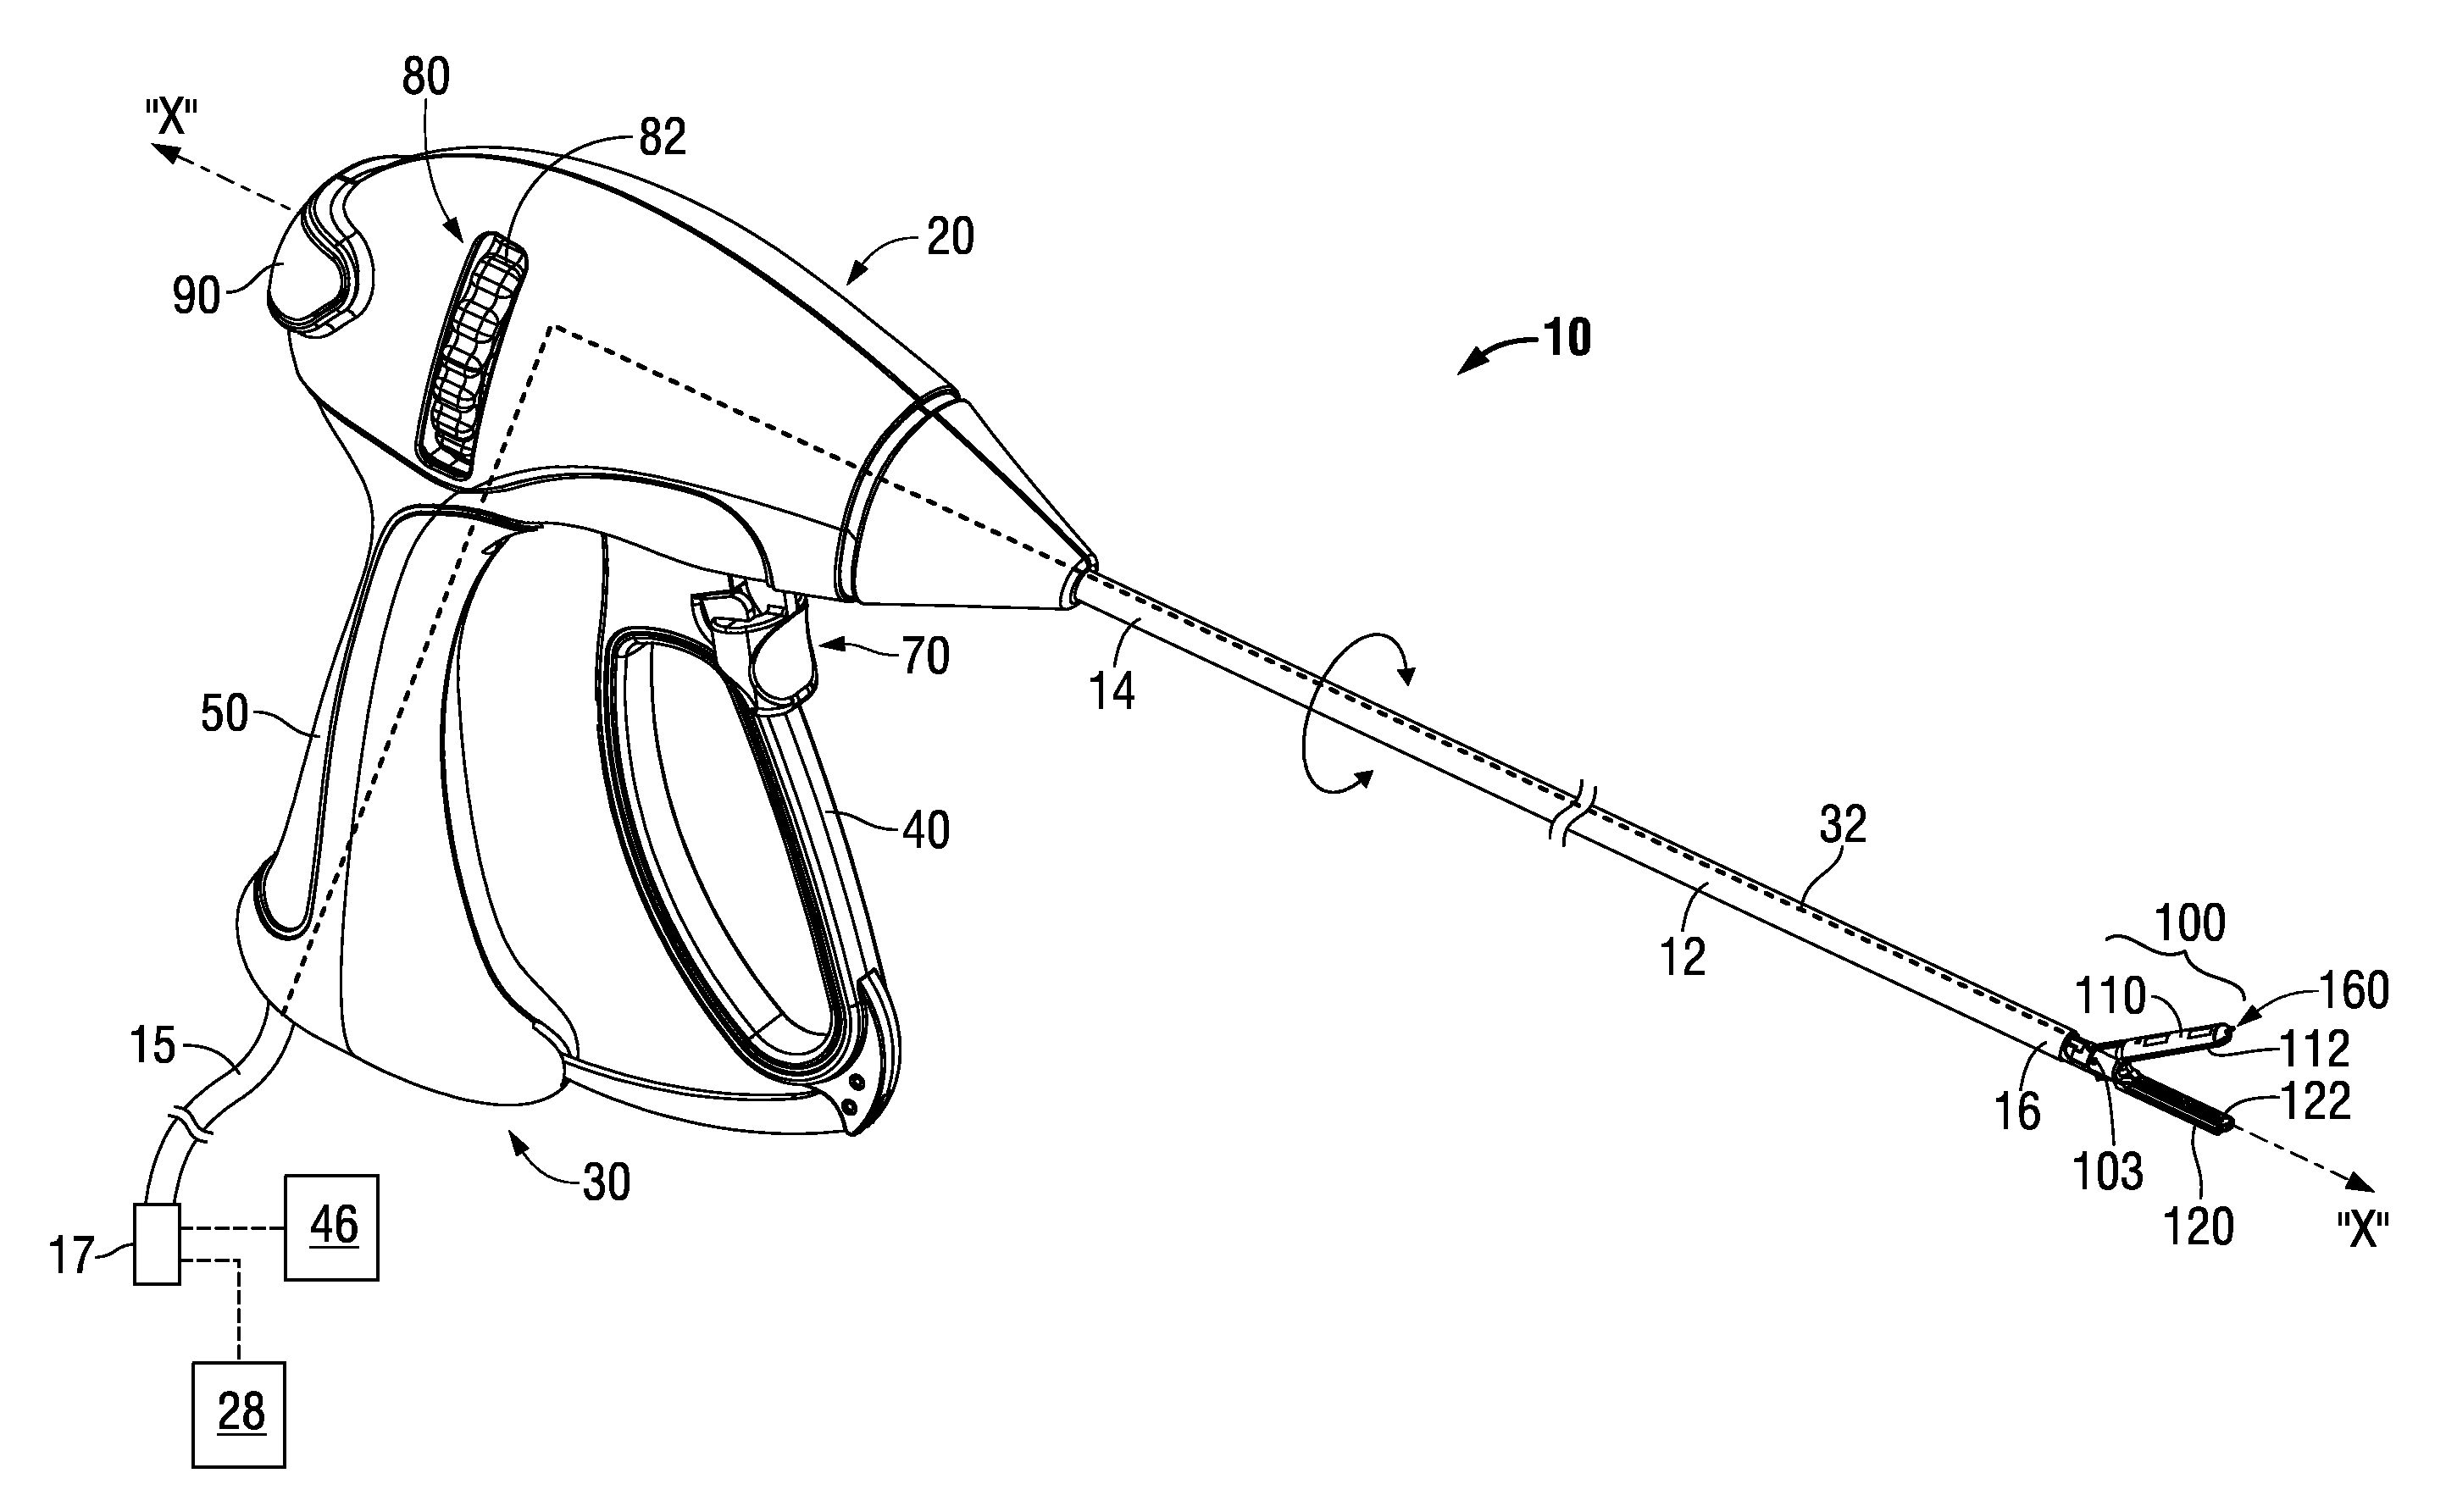 Surgical instruments including nerve stimulator apparatus for use in the detection of nerves in tissue and methods of directing energy to tissue using same